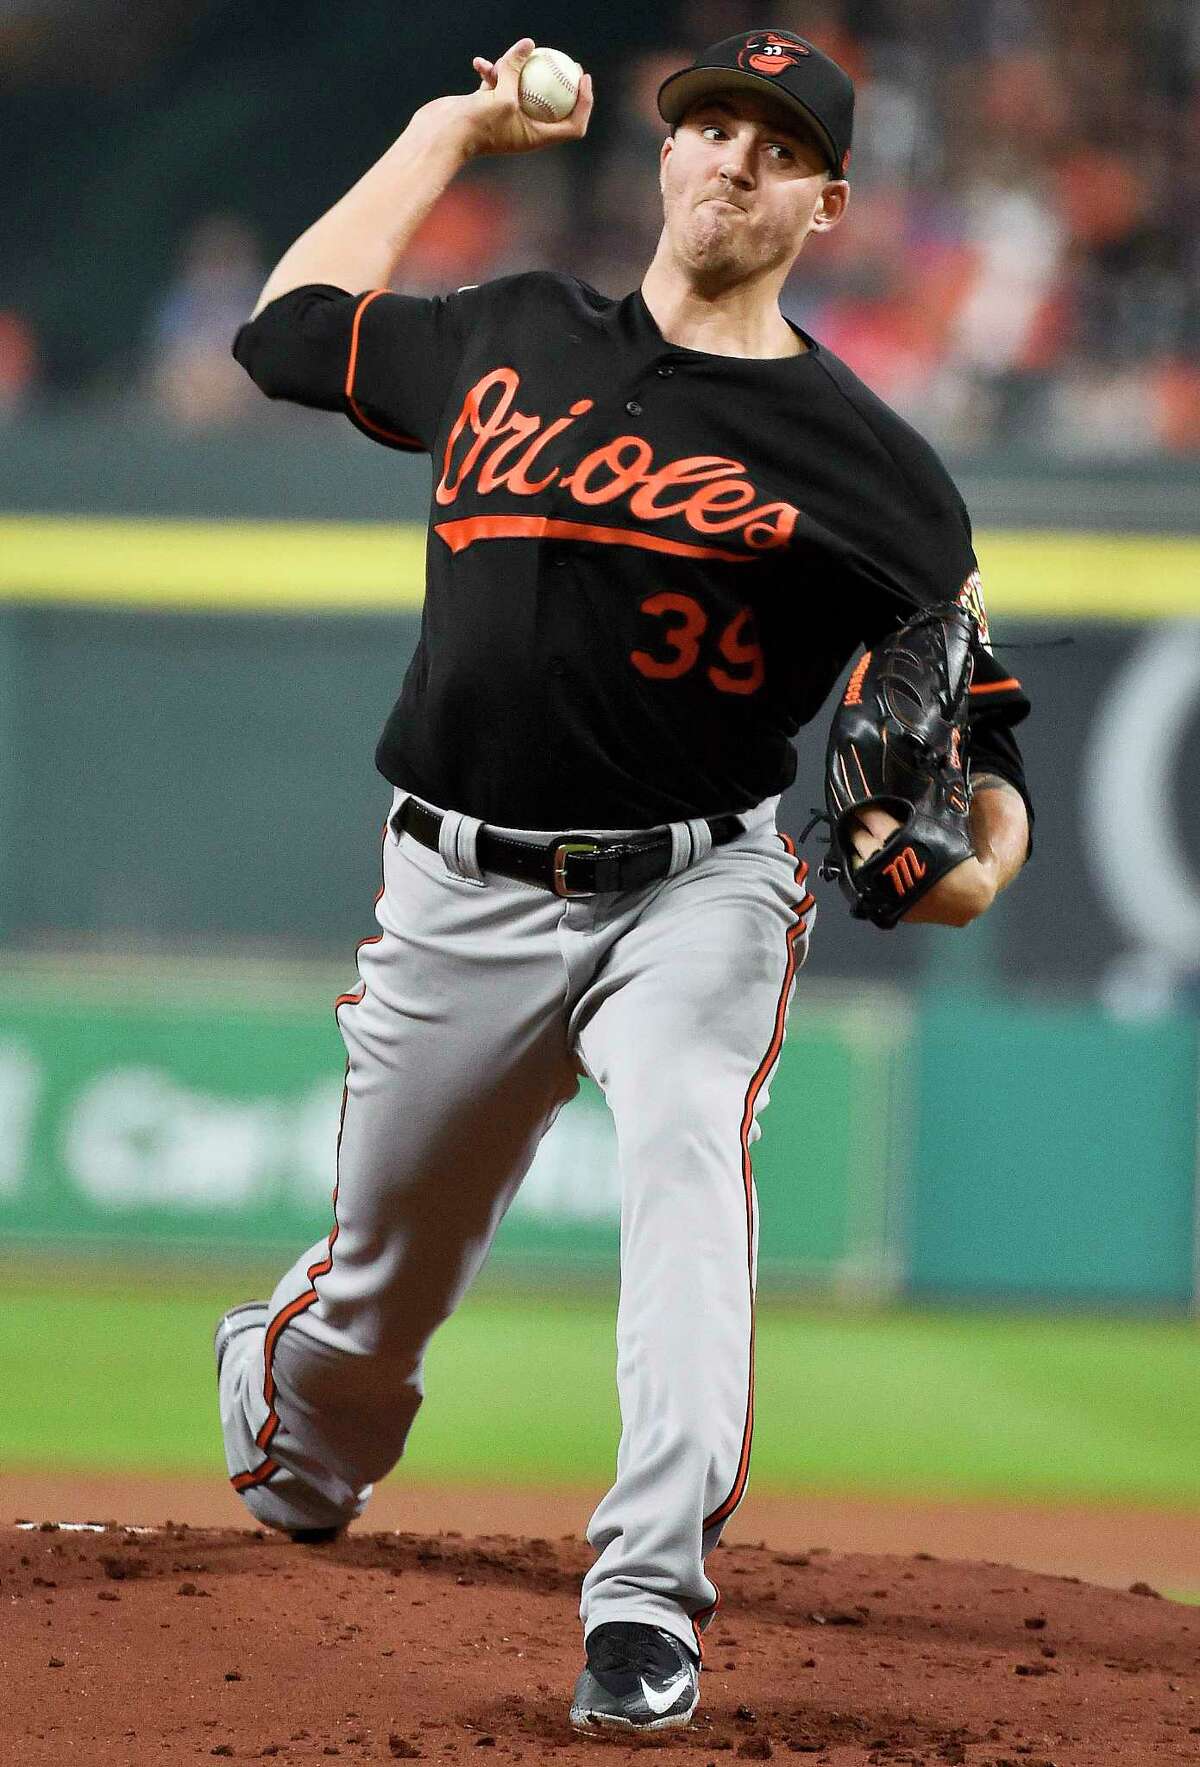 Baltimore Orioles starting pitcher Kevin Gausman delivers during the first inning of a baseball game against the Houston Astros, Friday, May 26, 2017, in Houston. (AP Photo/Eric Christian Smith)